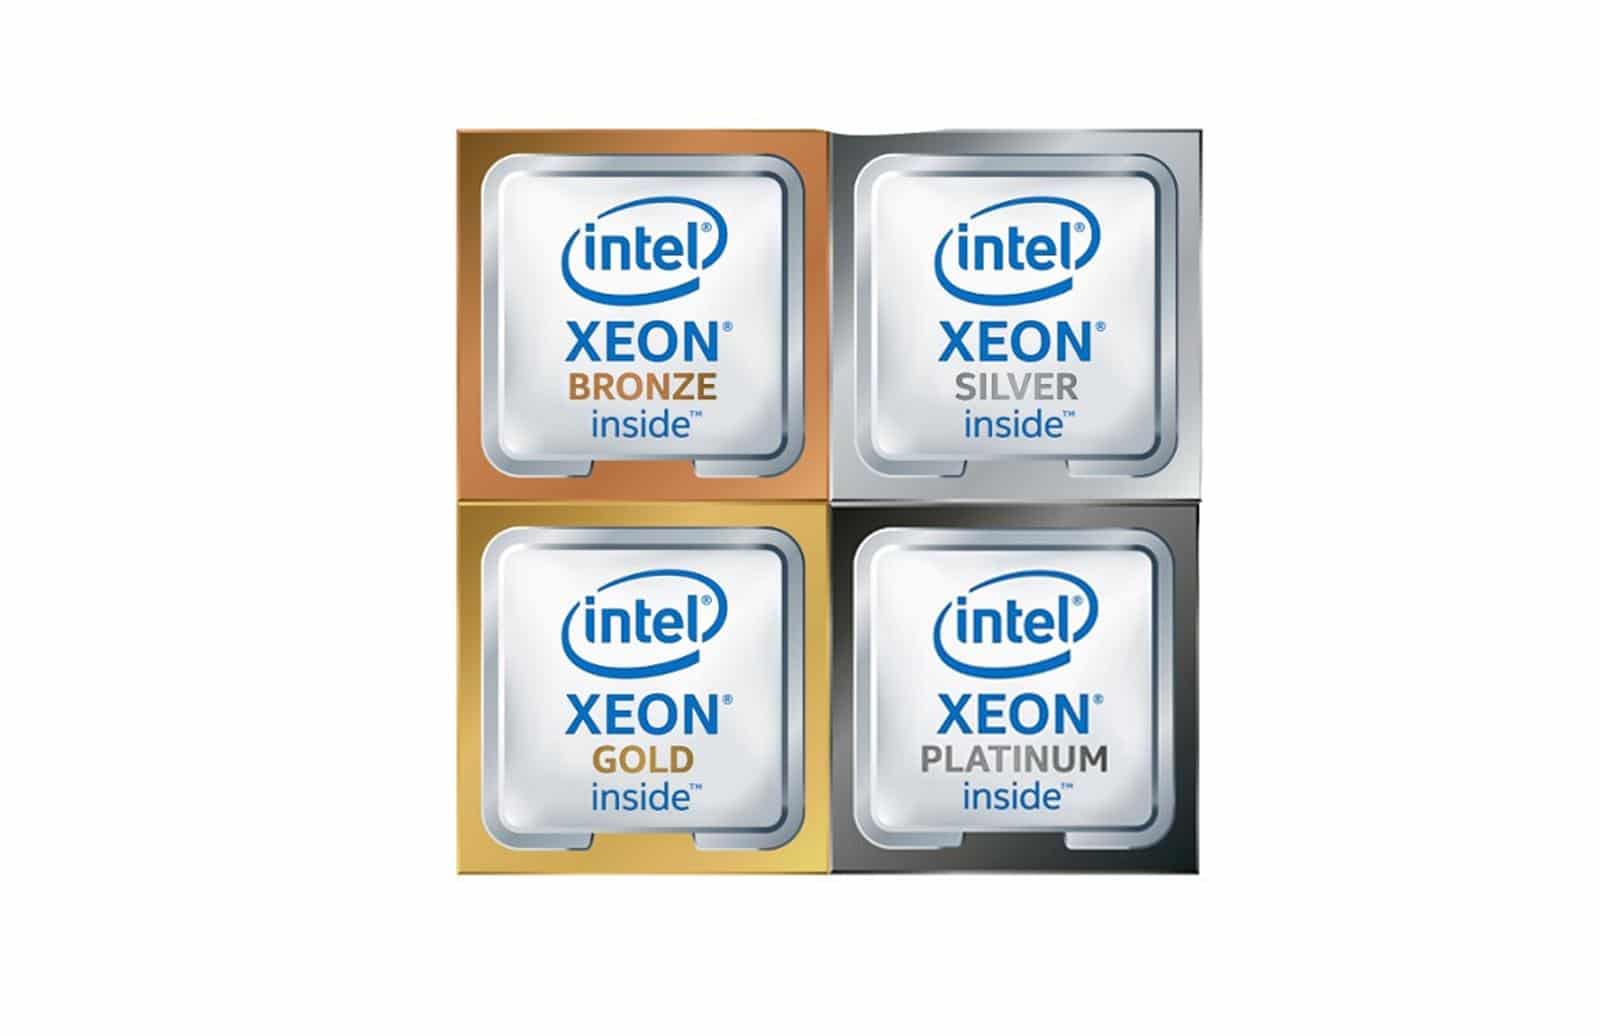 Intel Xeon processors as services?  Pay and we'll unlock your cores